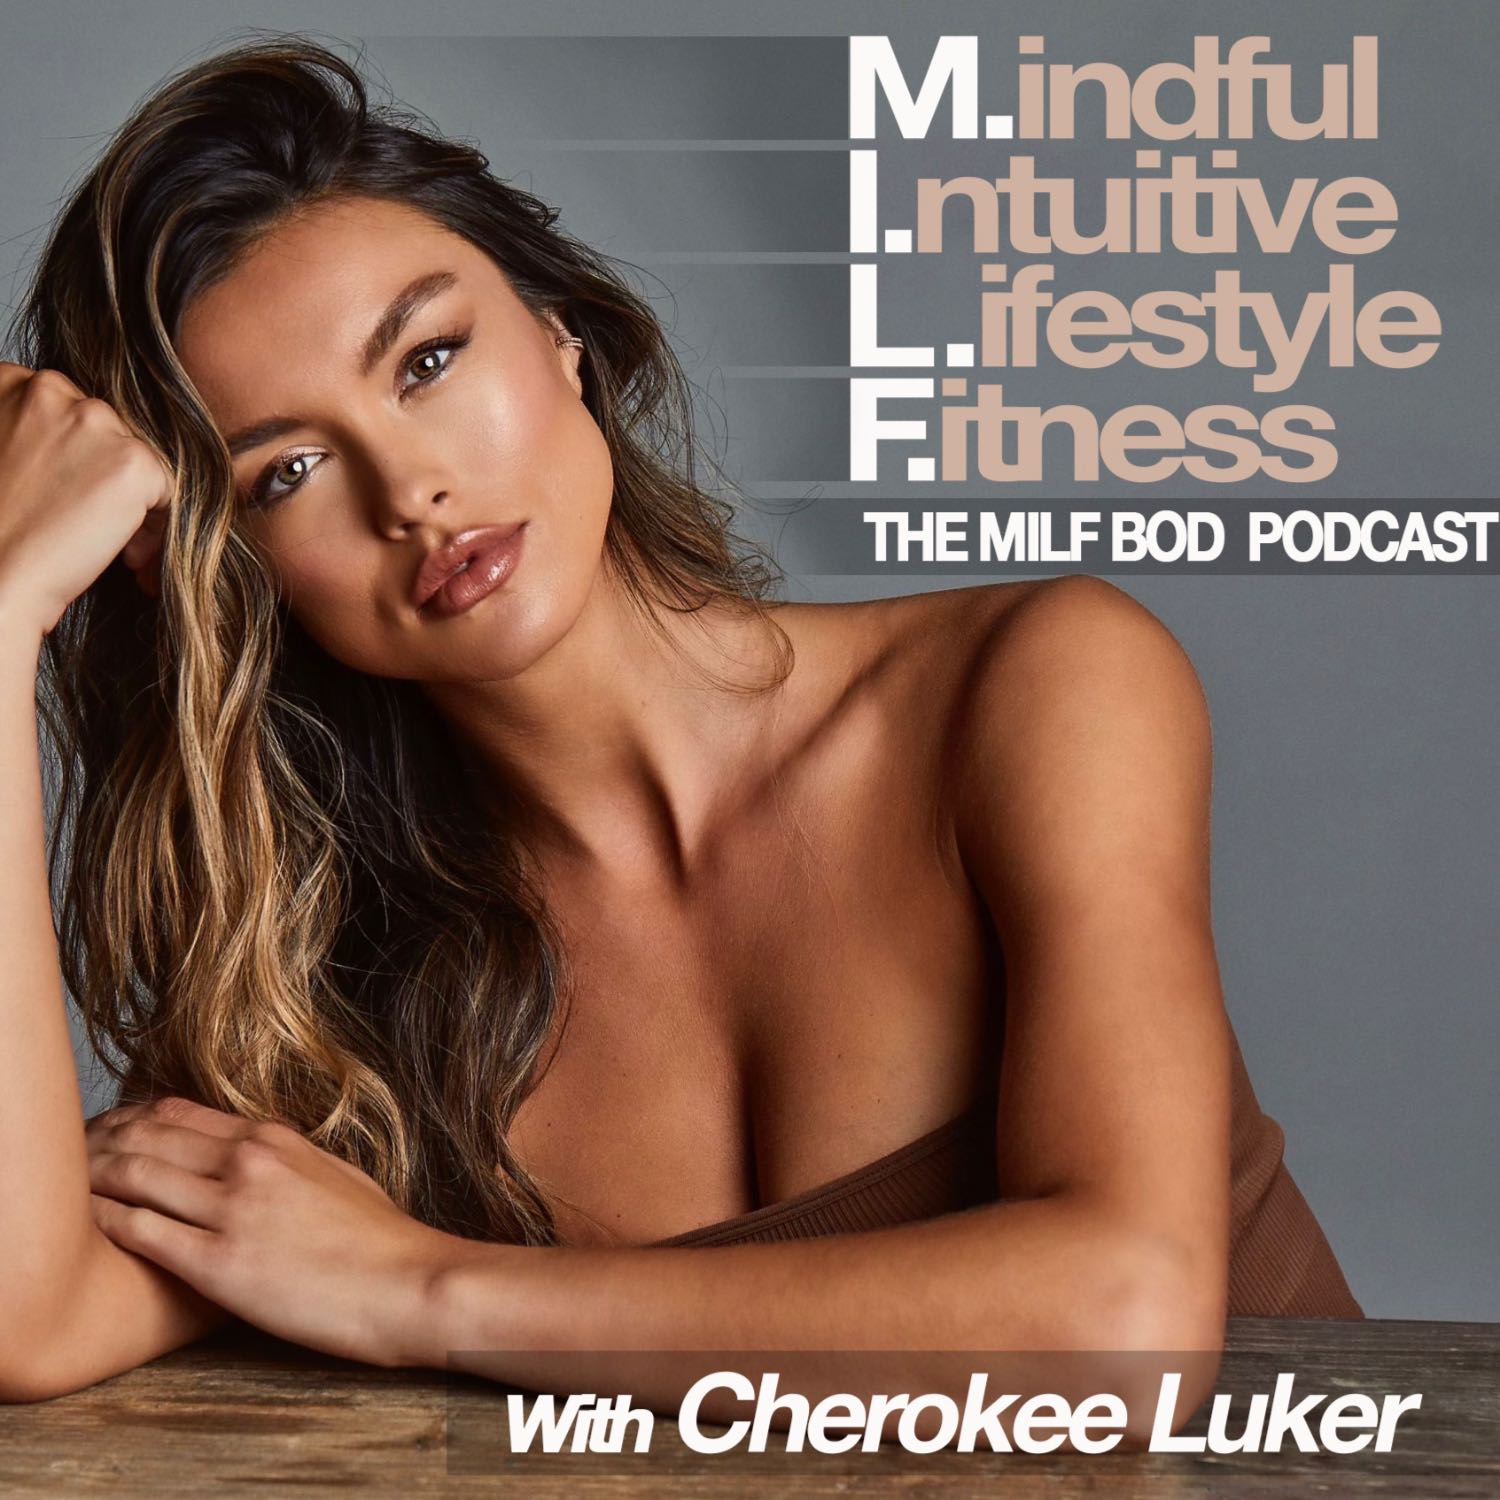 Solo Episode ON: What I do to stay MINDFUL, how I listen to my INTUITION, my LIFESTYLE non negotiables, and my FITNESS routine